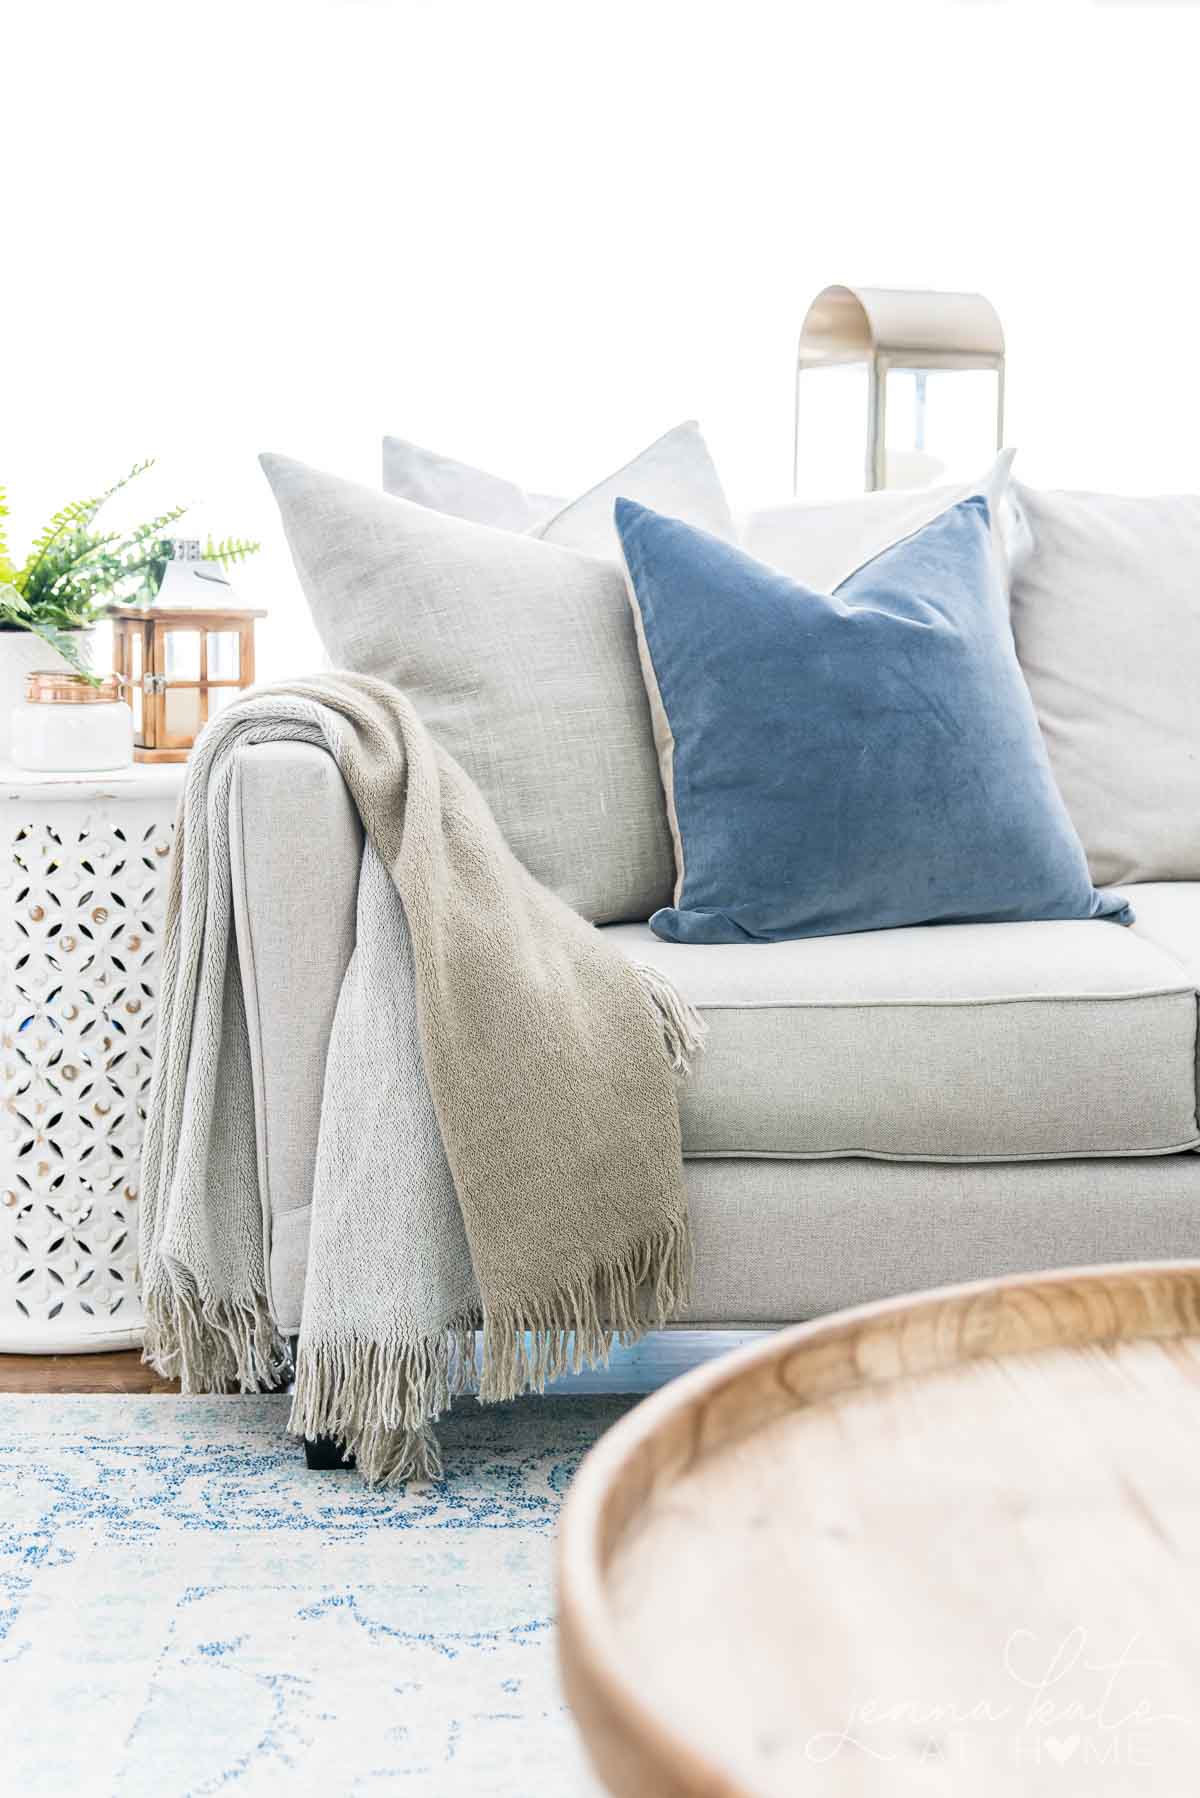 Make your house cozy for fall with these simple, budget-friendly ideas and tips.